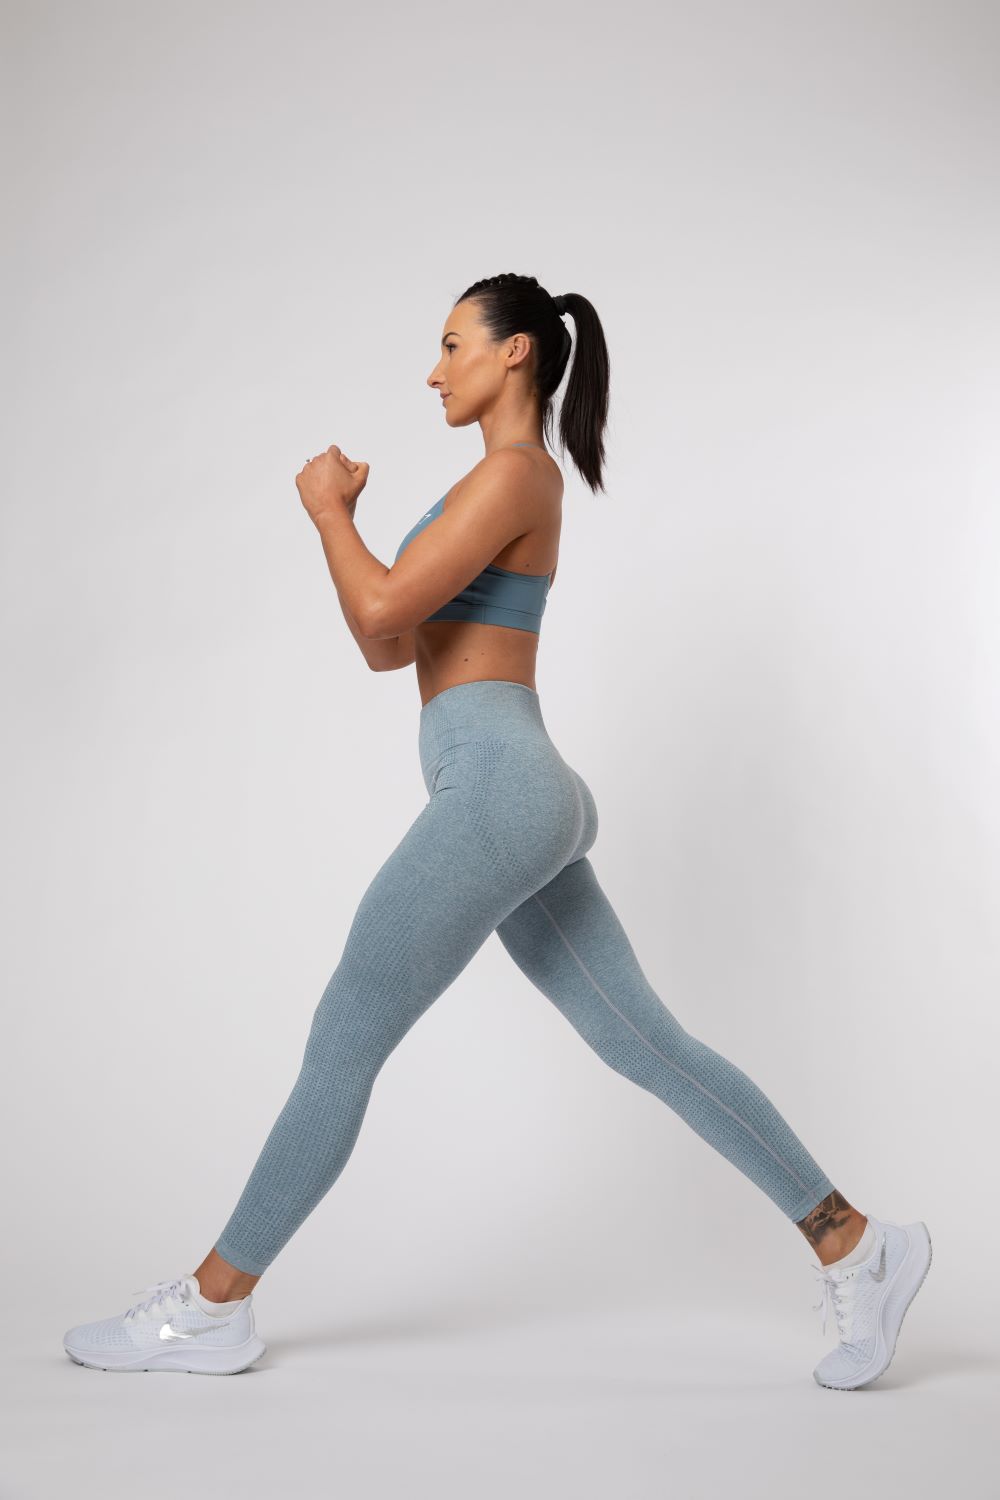 woman doing a lunge personal trainer home workout 